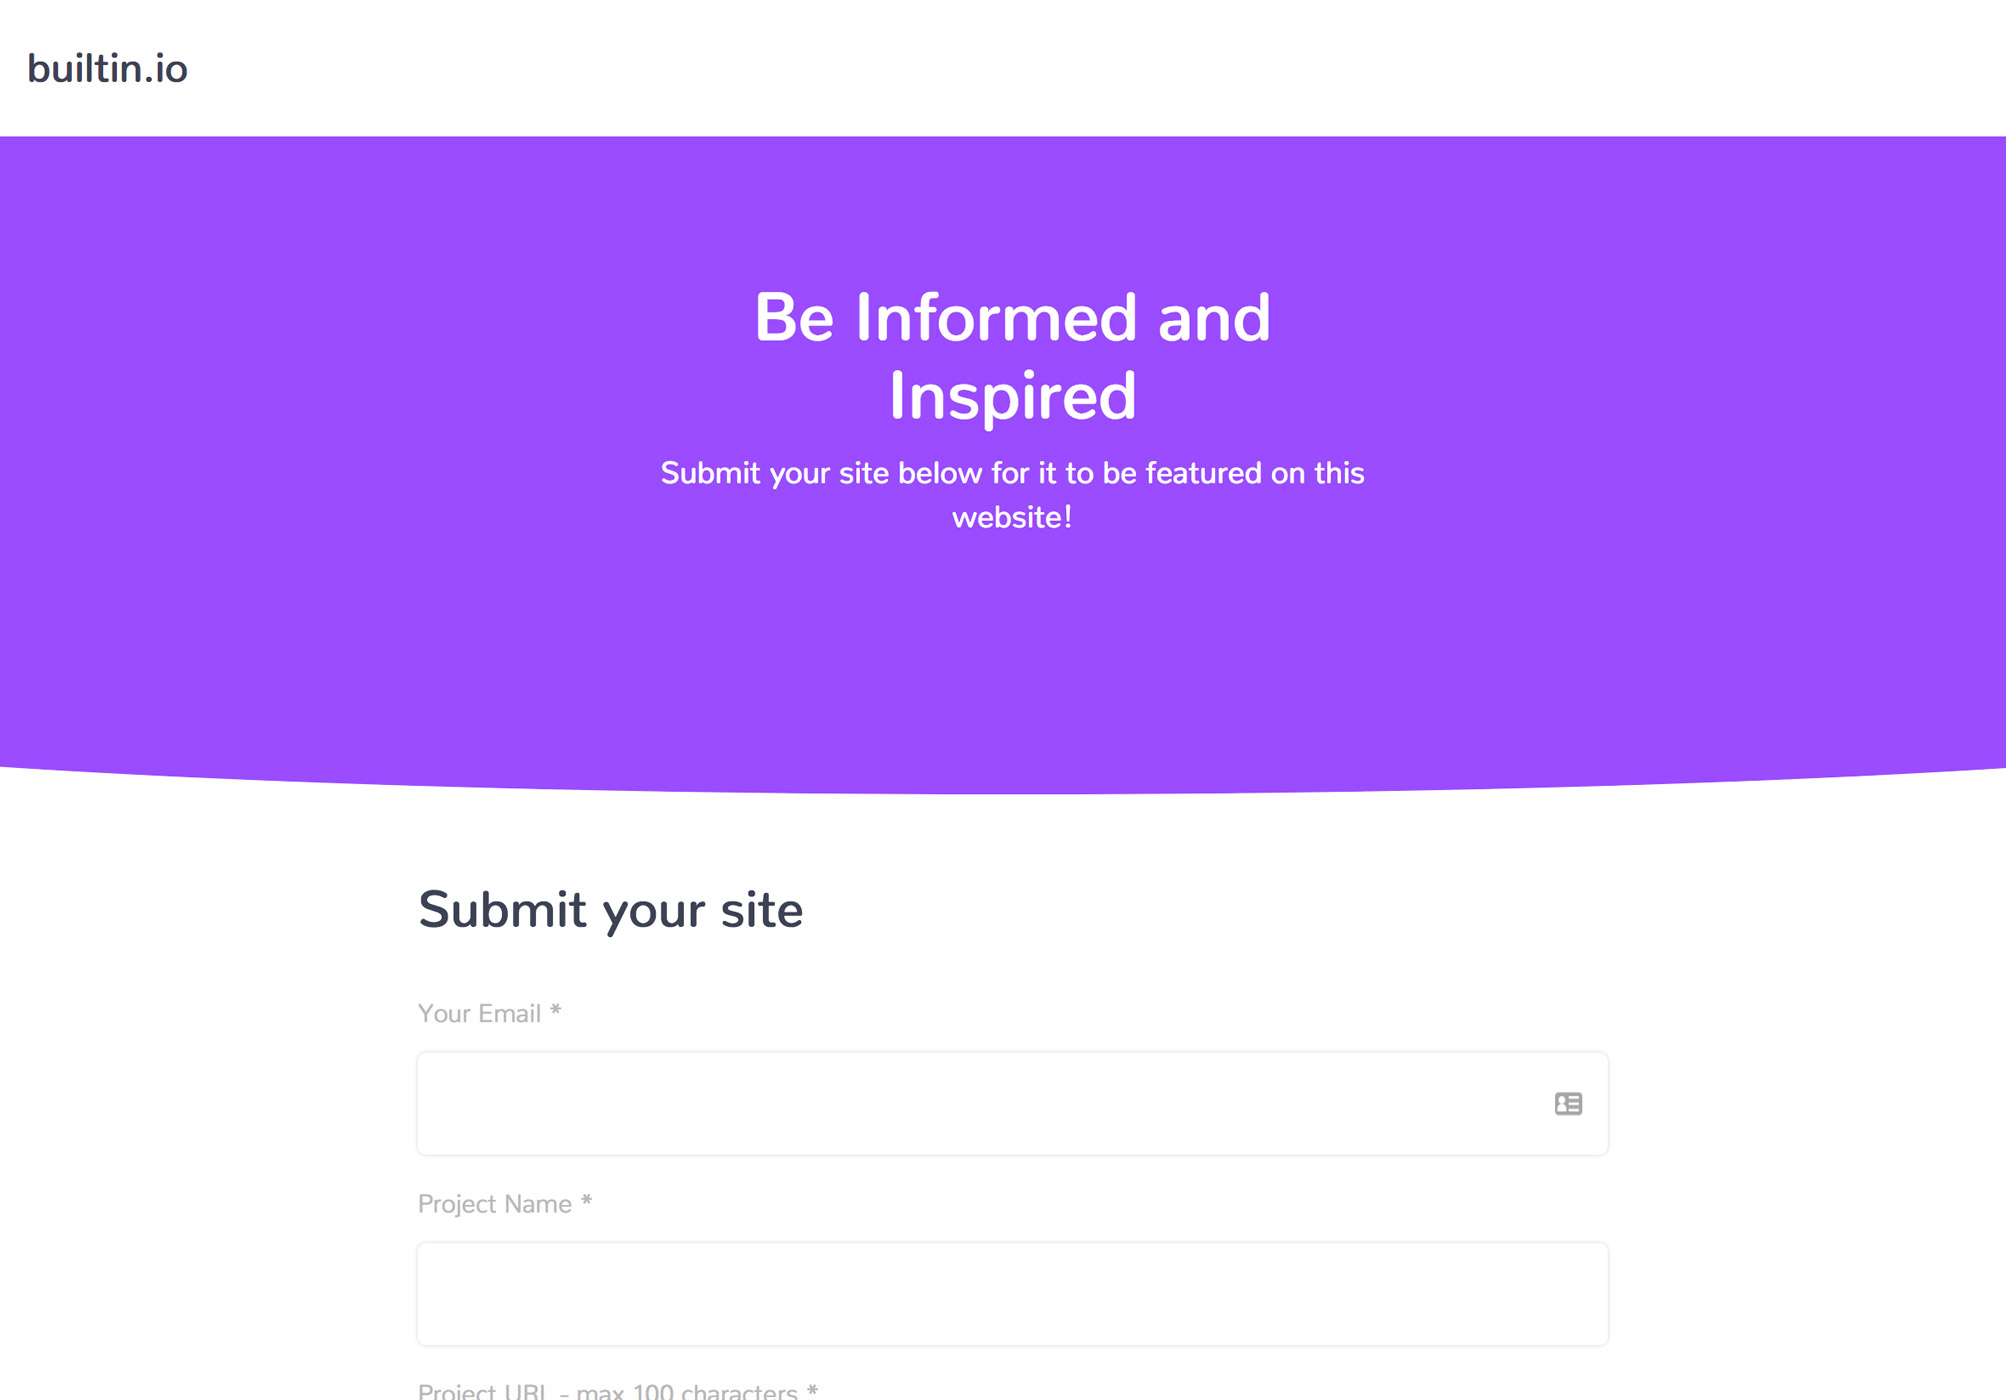 Builtin.io submission page